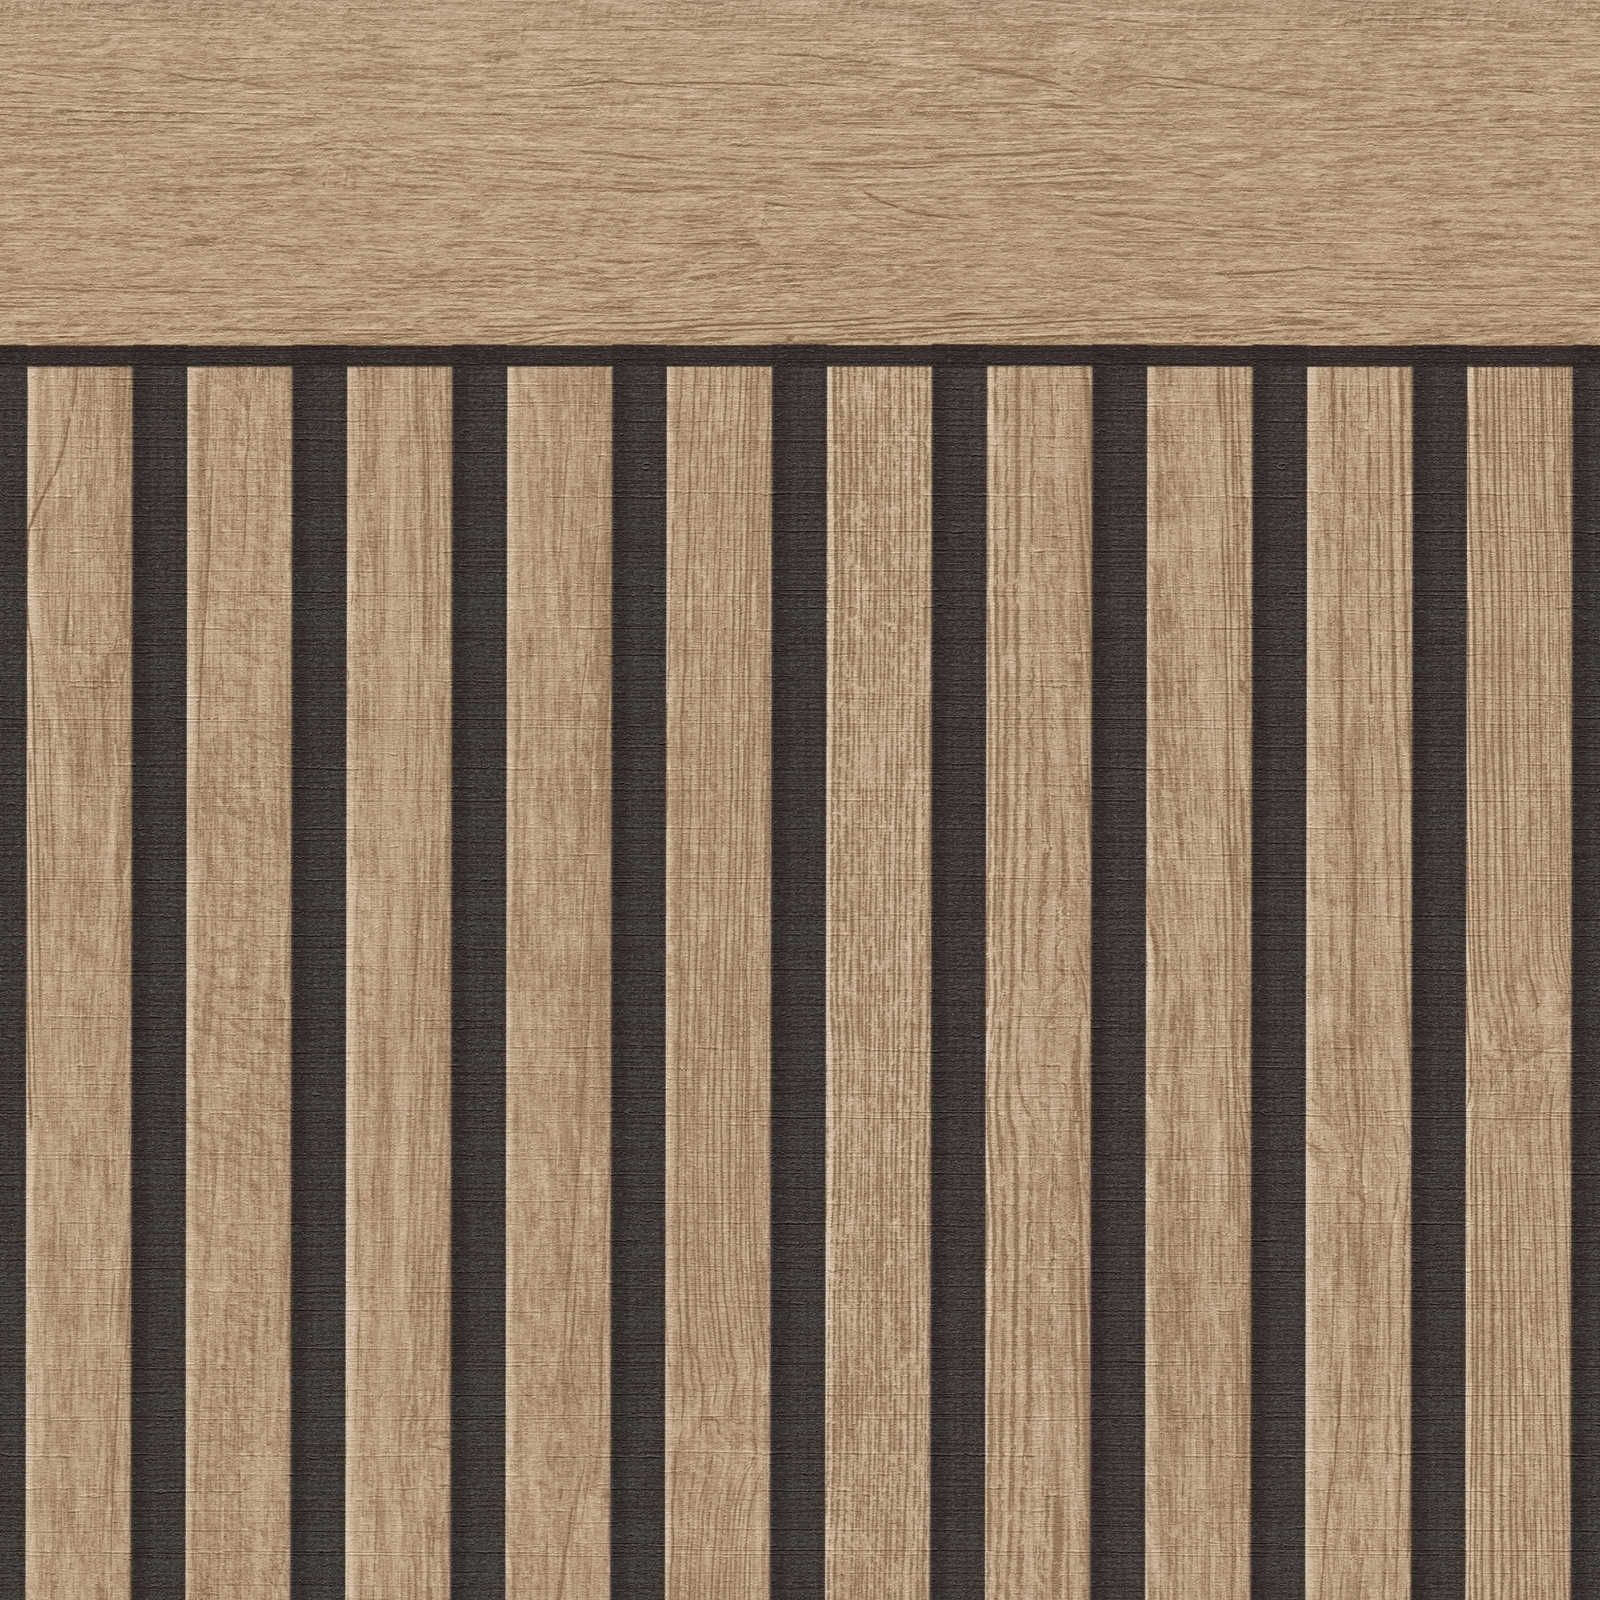         Non-woven wall panel with realistic acoustic panel pattern made of wood - beige, brown
    